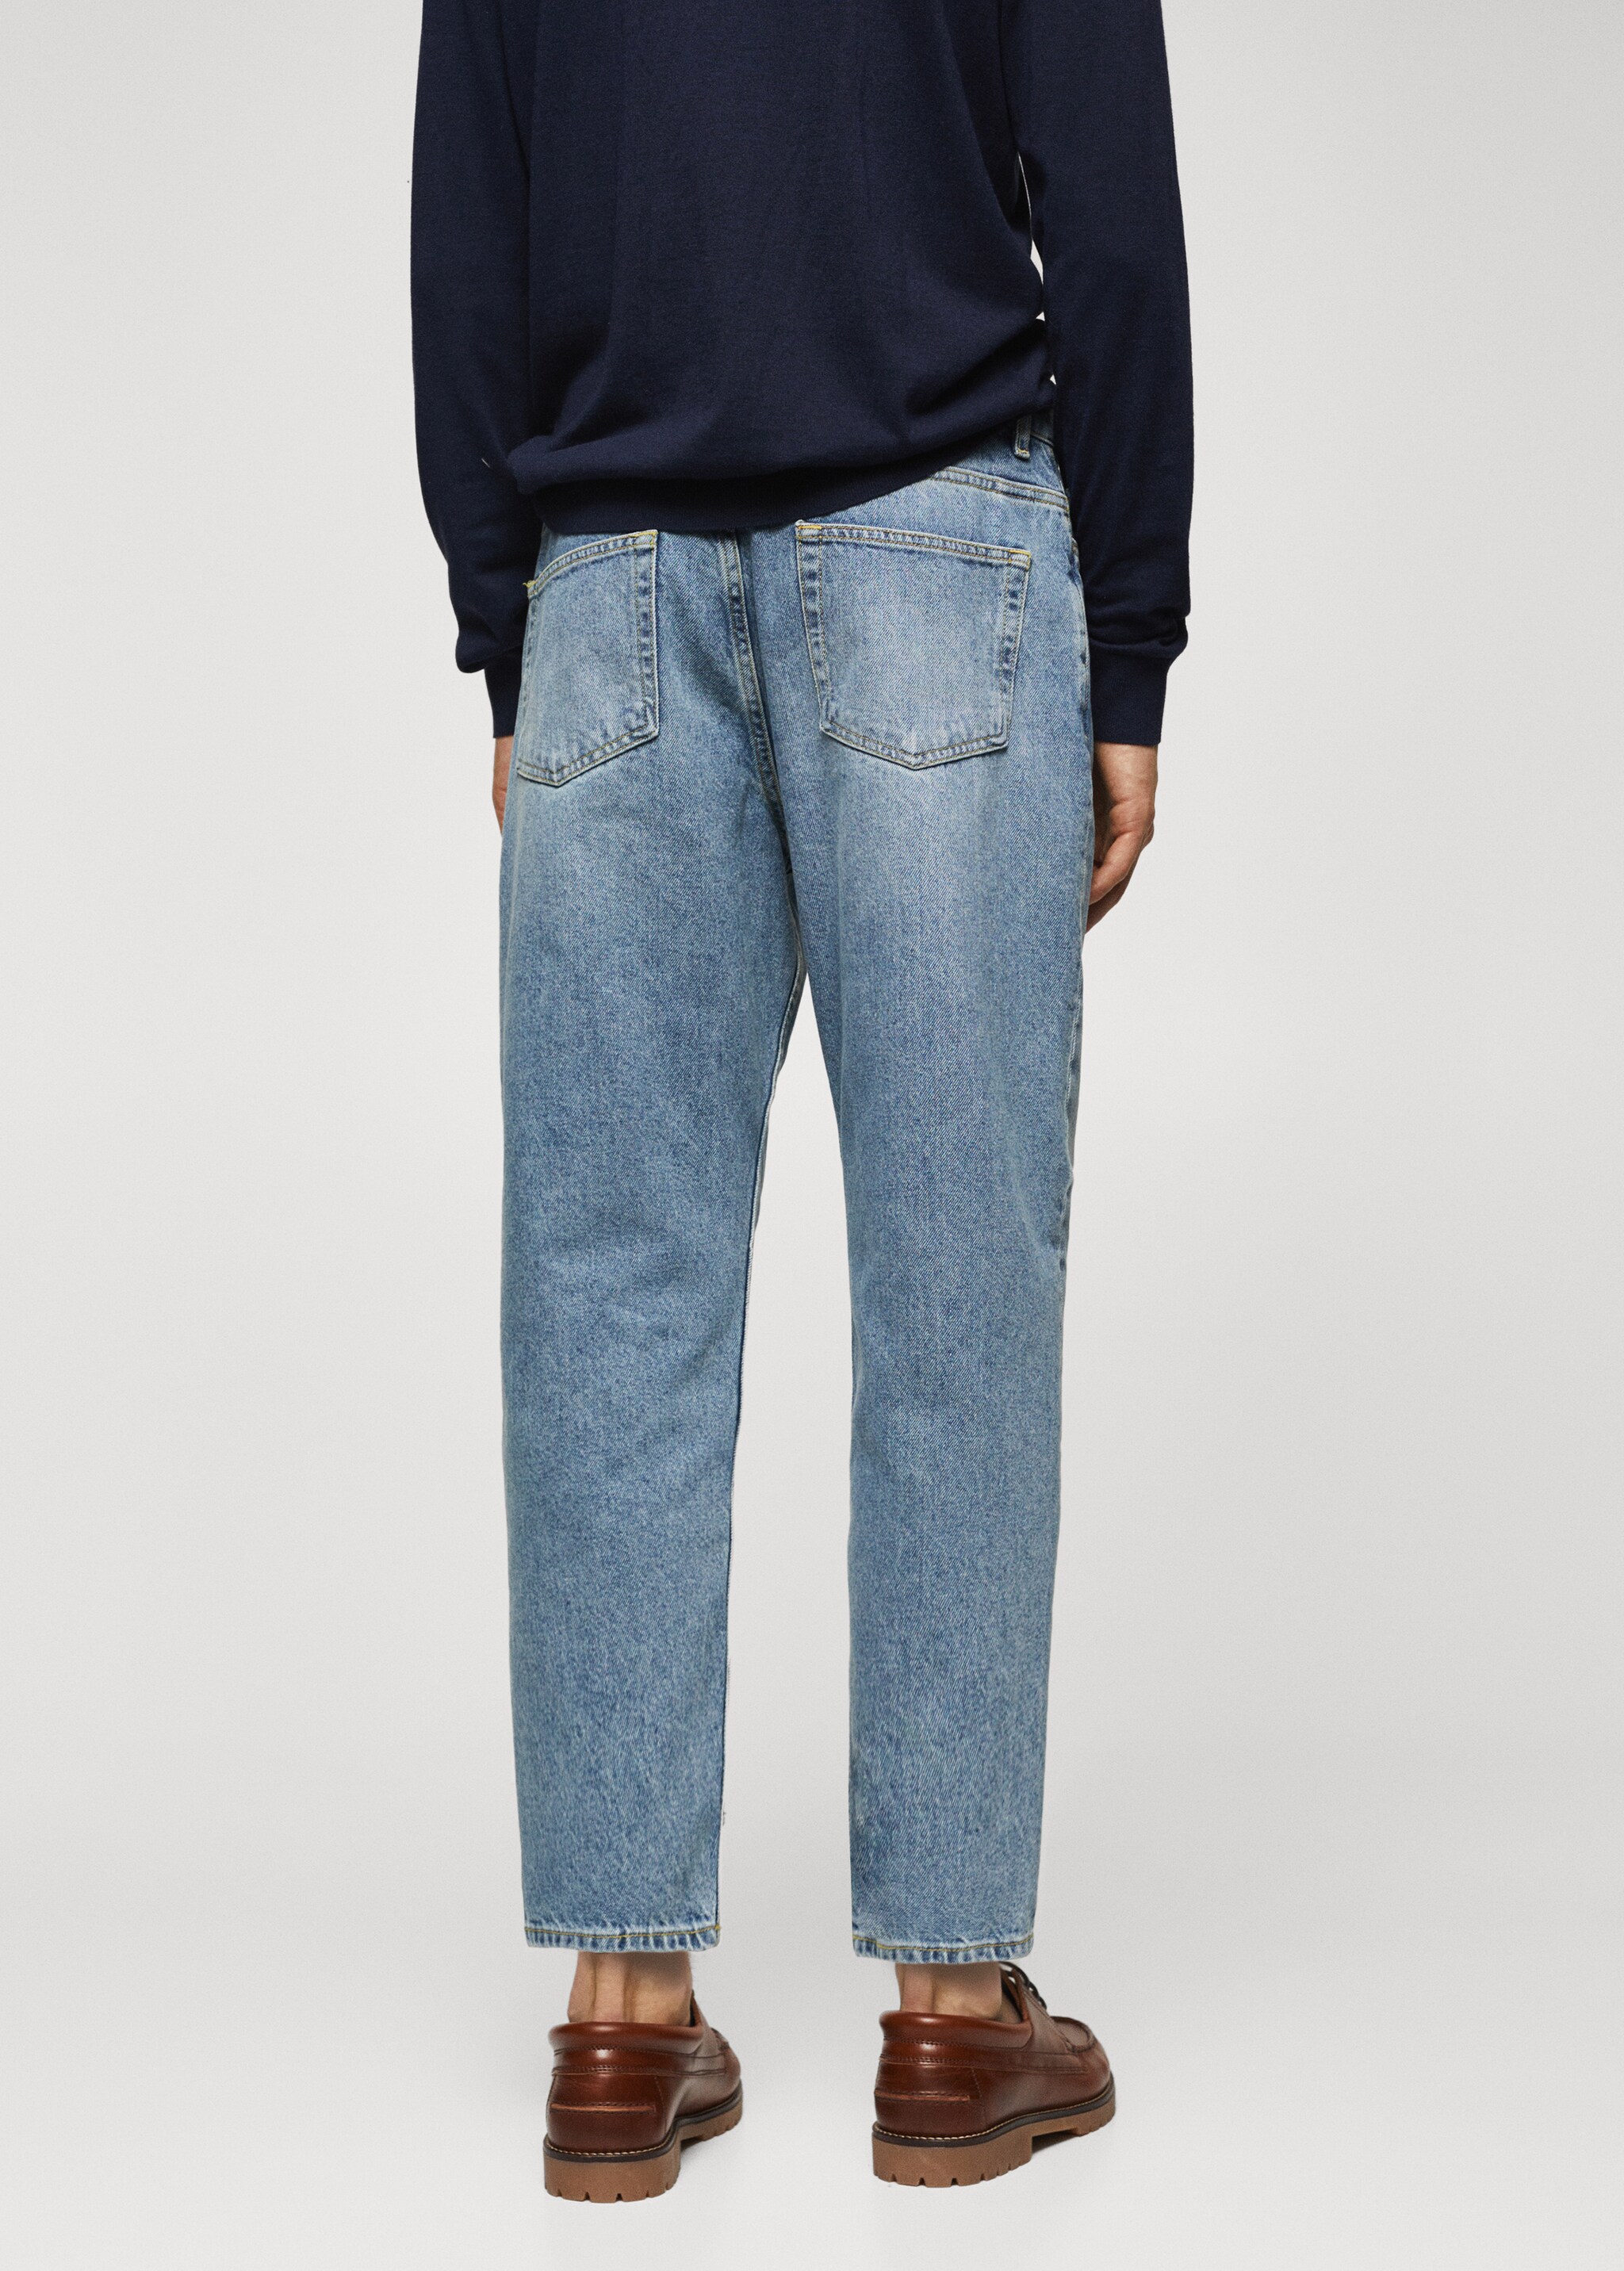 Jeans tapered loose cropped  - Reverso del artículo